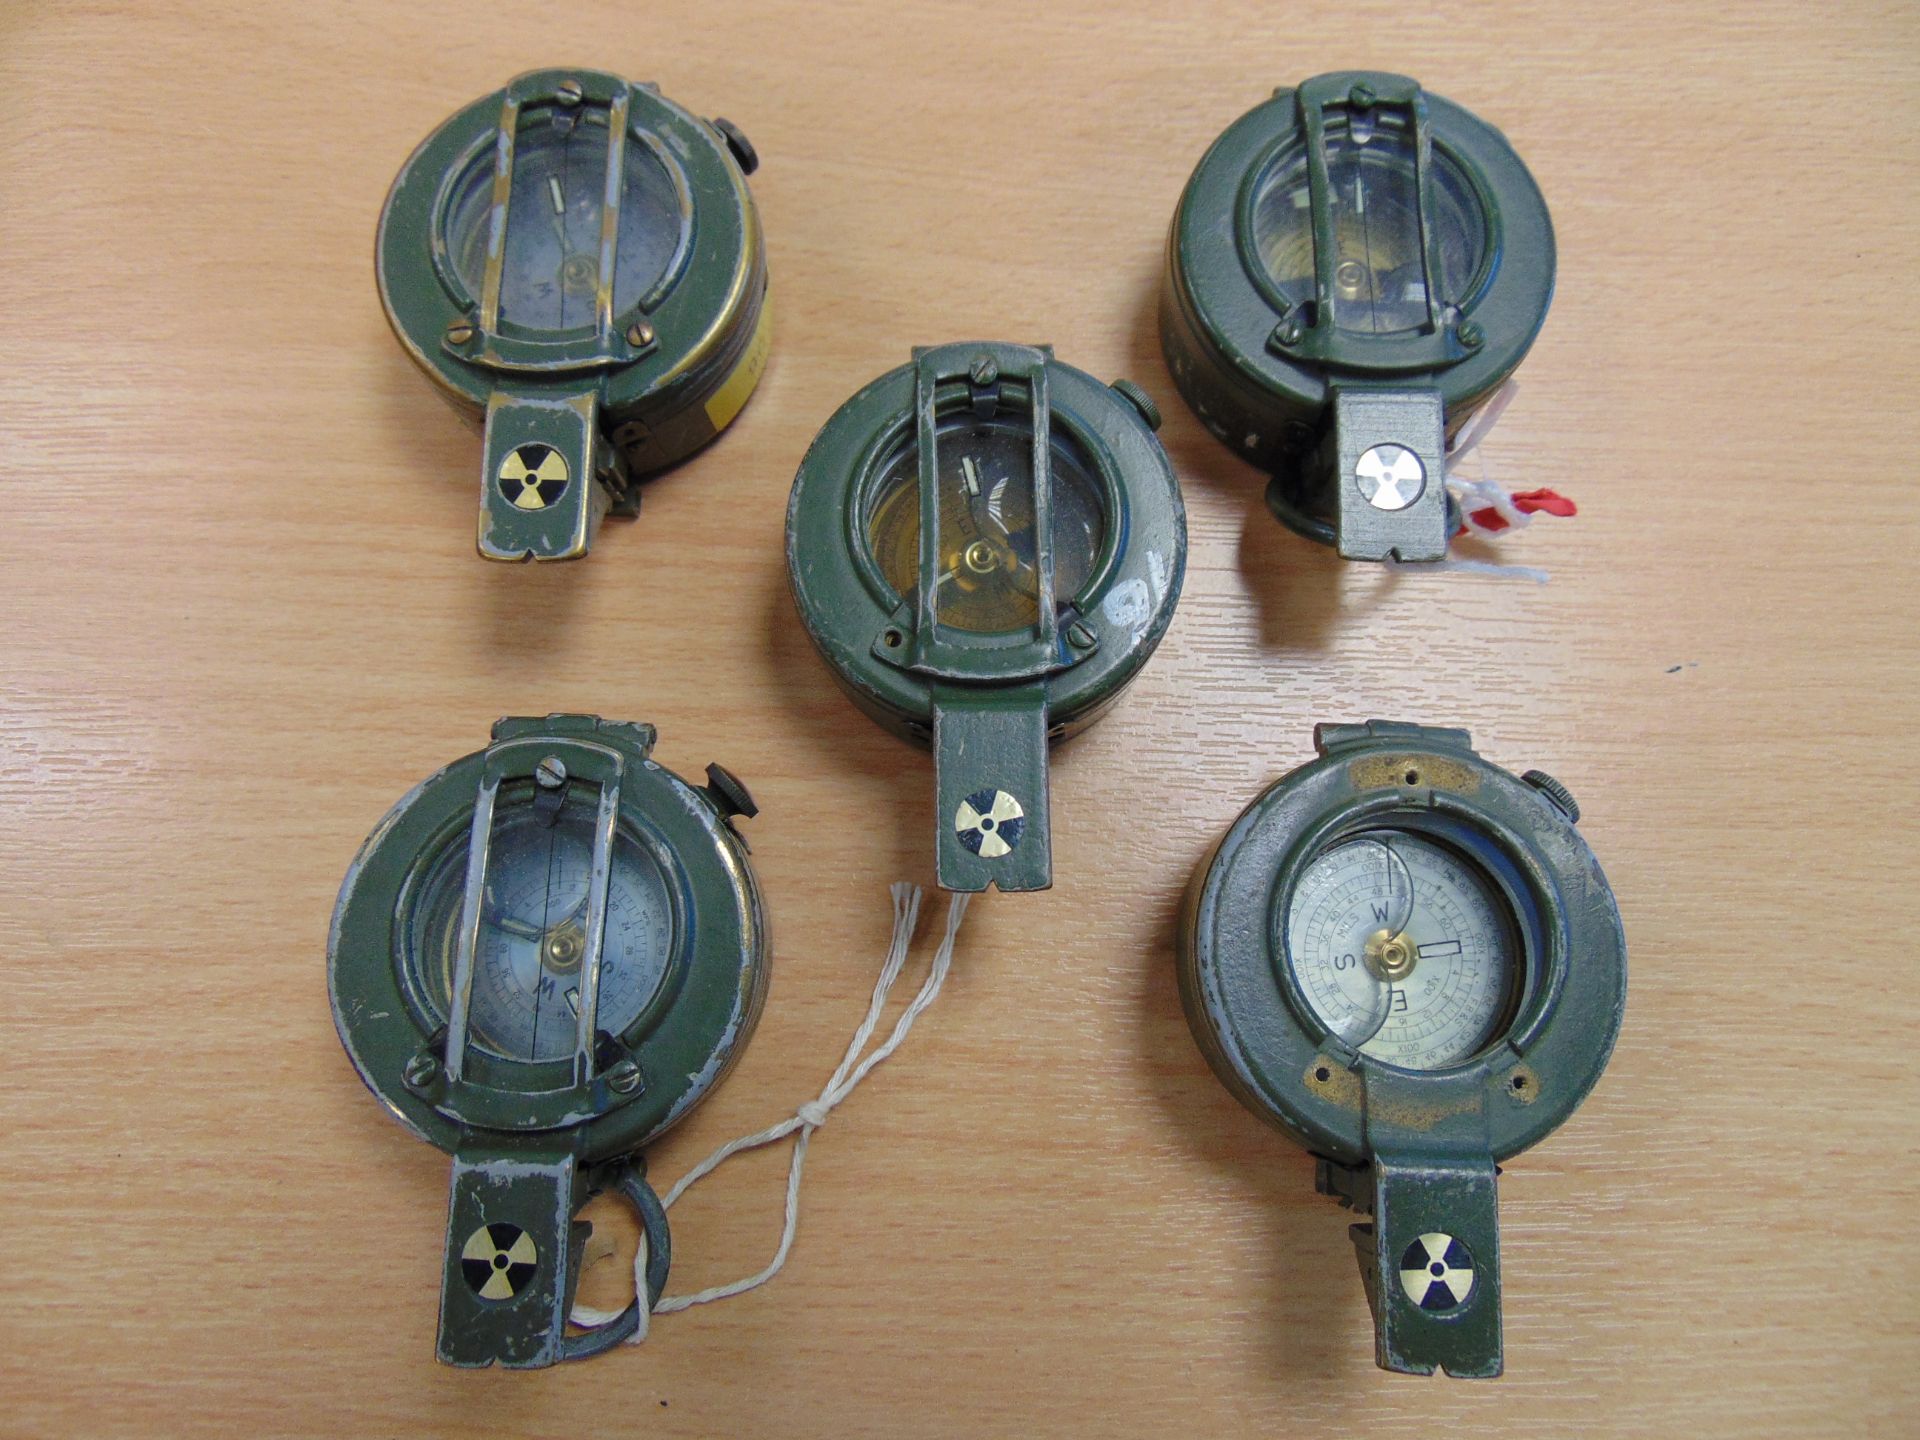 5 x Stanley London British Army Brass Prismatic Compass - Image 2 of 4